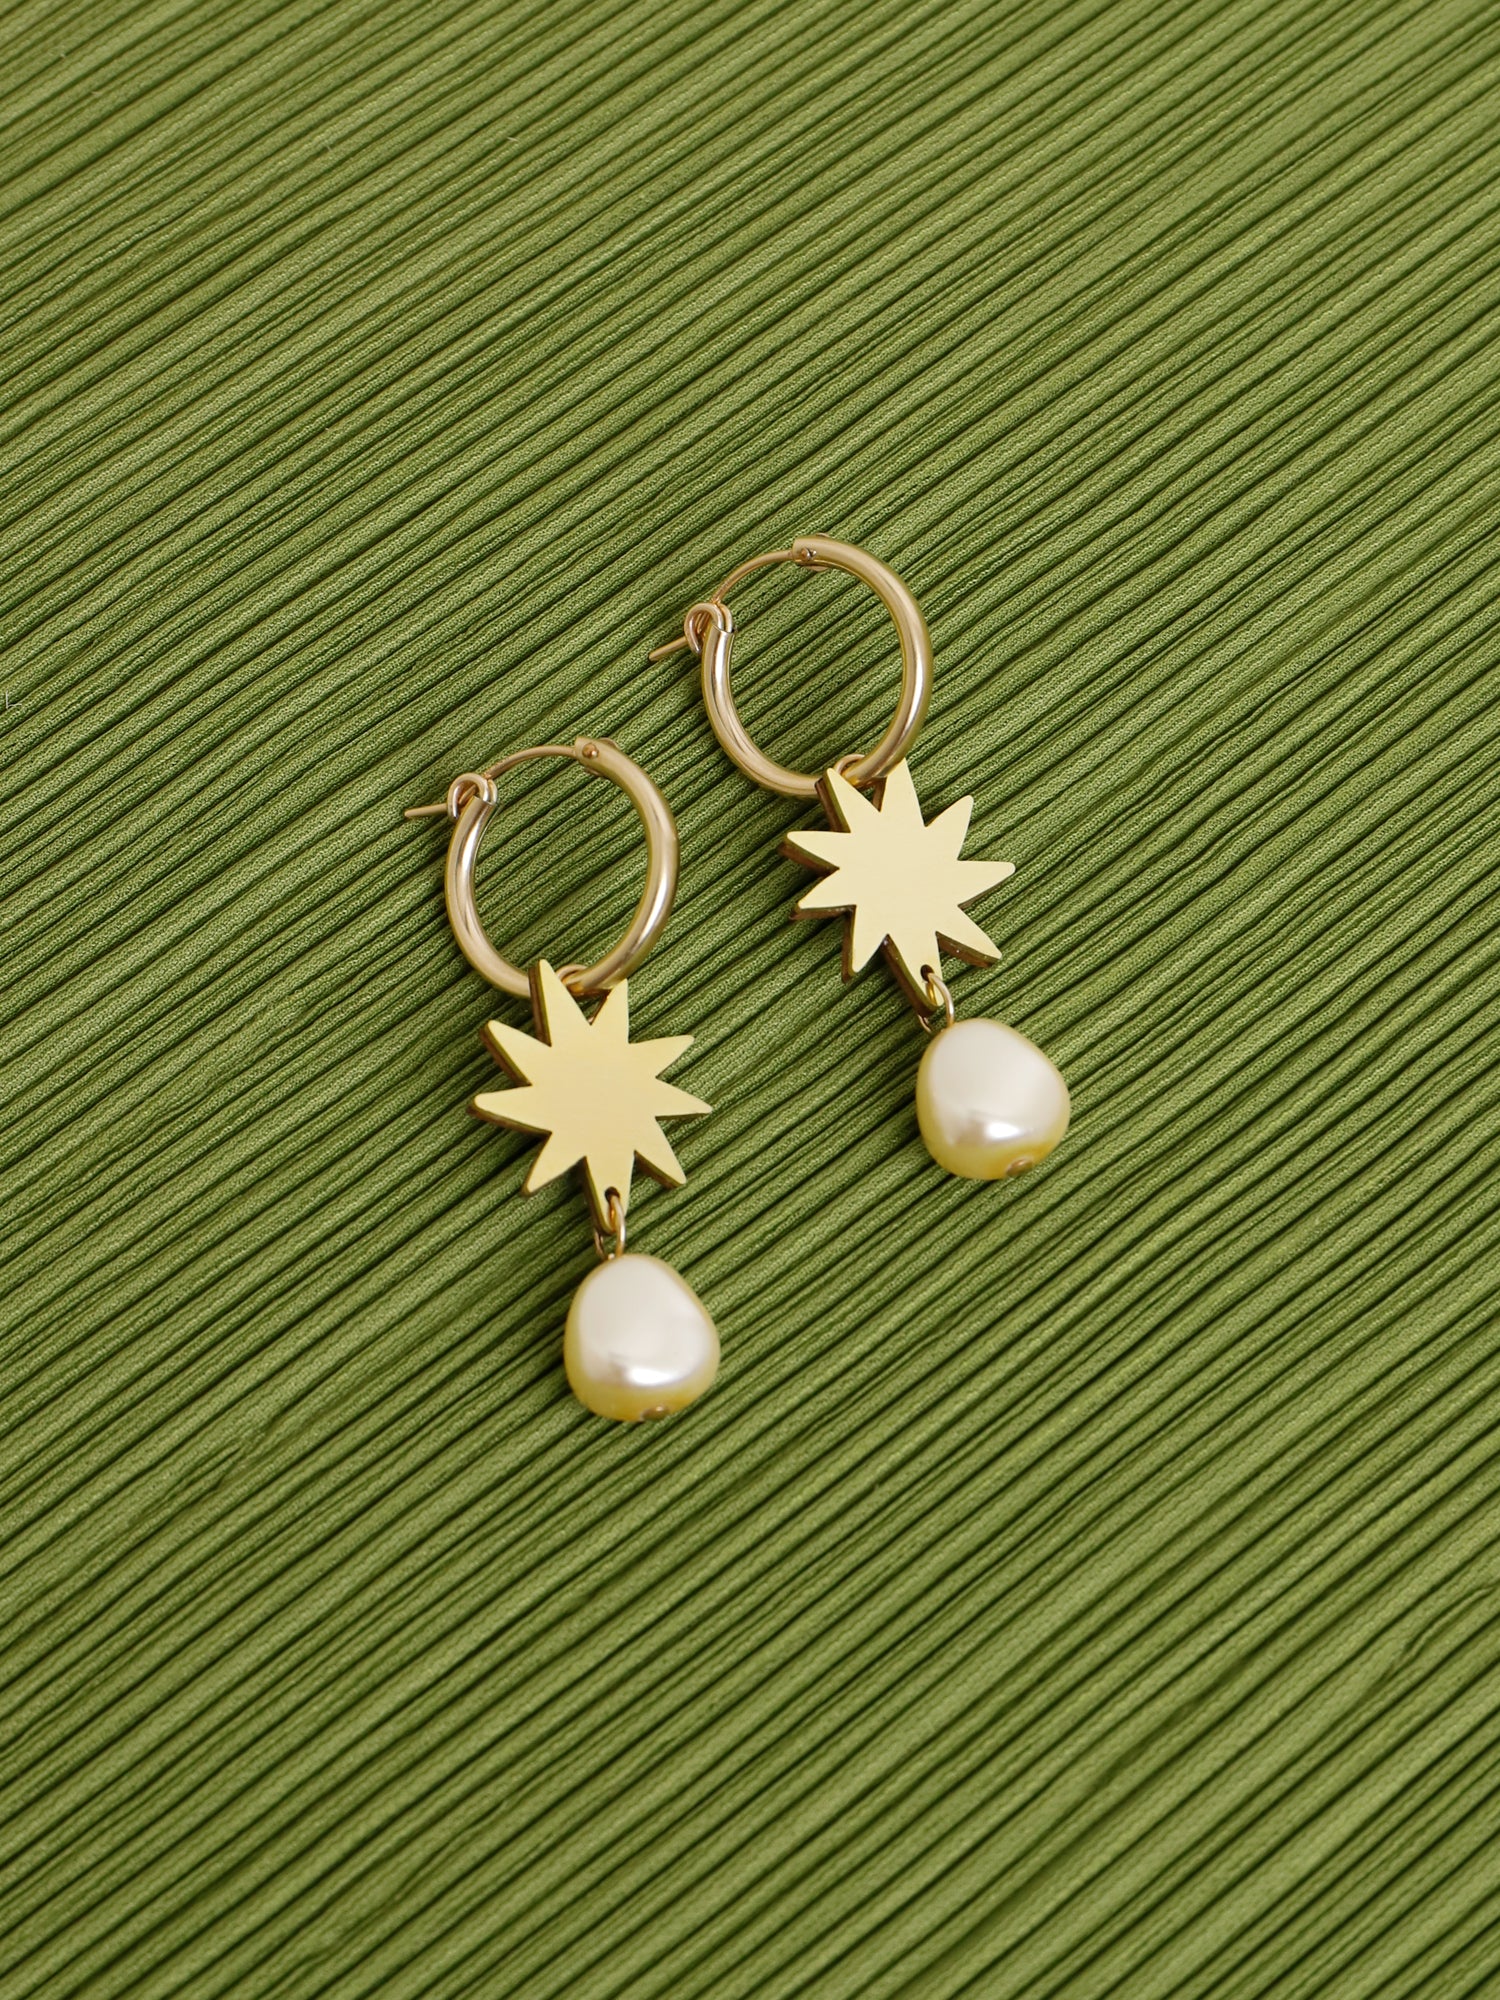 Elegant hoop earrings, inspired by Matisse's cutout-style stars. Made in brass with our signature wood base, Czech glass baroque pearls and 14k gold-filled findings. Handmade in the UK by Wolf & Moon.